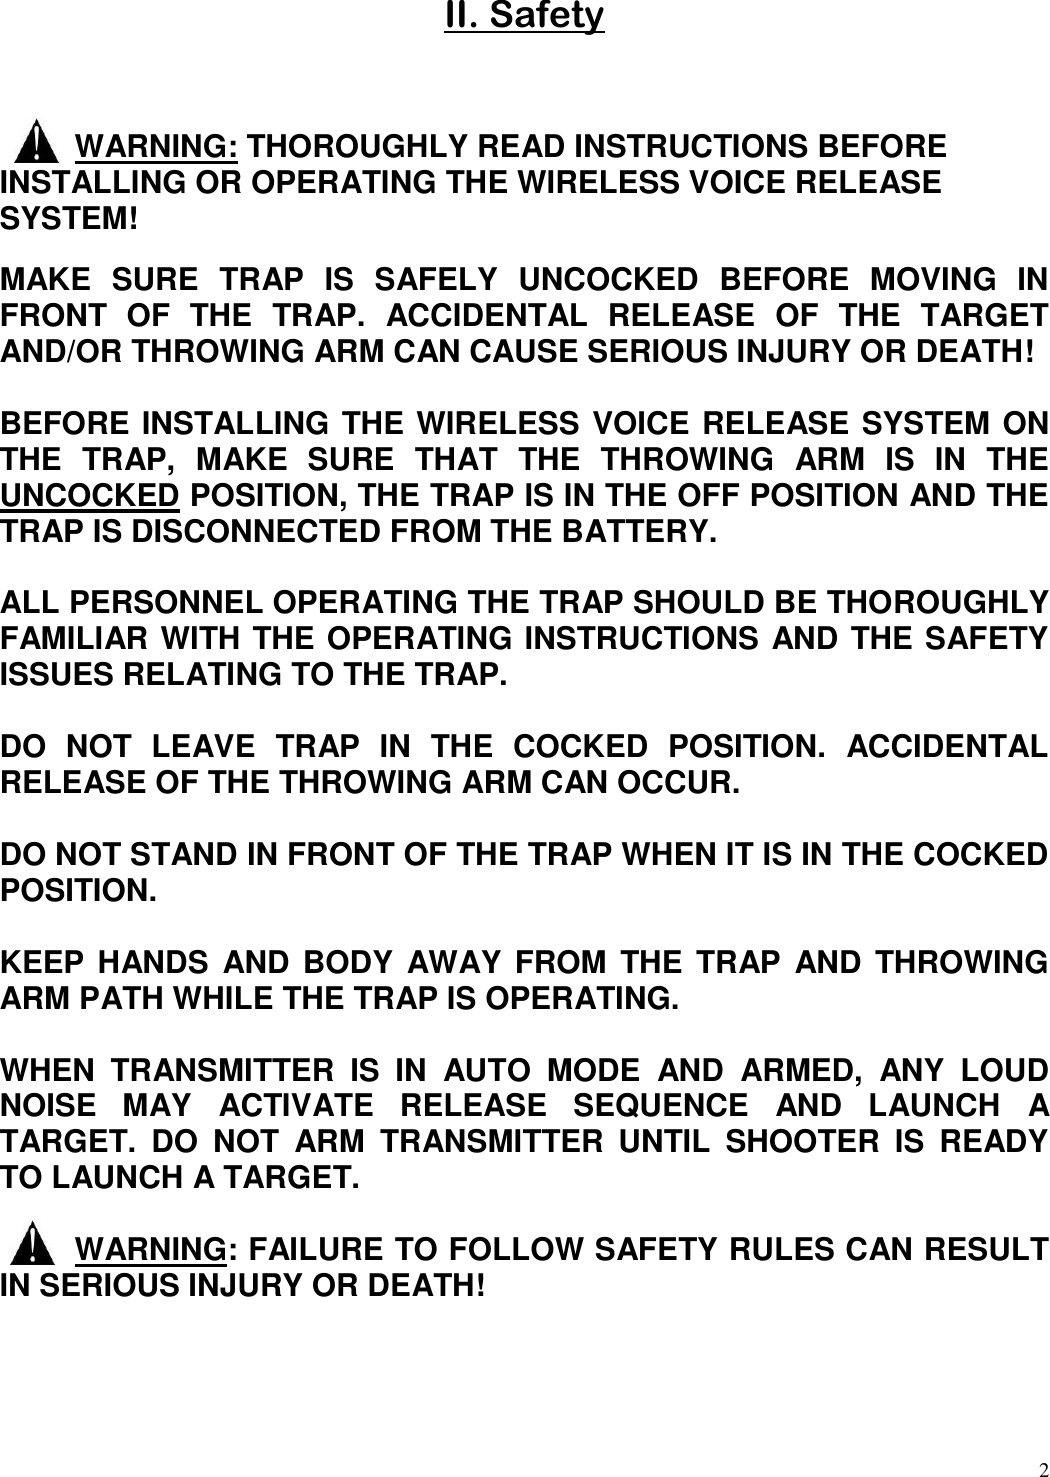 2  II. Safety    WARNING: THOROUGHLY READ INSTRUCTIONS BEFORE INSTALLING OR OPERATING THE WIRELESS VOICE RELEASE SYSTEM! MAKE  SURE  TRAP  IS  SAFELY  UNCOCKED  BEFORE  MOVING  IN FRONT  OF  THE  TRAP.  ACCIDENTAL  RELEASE  OF  THE  TARGET AND/OR THROWING ARM CAN CAUSE SERIOUS INJURY OR DEATH!  BEFORE INSTALLING THE WIRELESS VOICE RELEASE SYSTEM ON THE  TRAP,  MAKE  SURE  THAT  THE  THROWING  ARM  IS  IN  THE UNCOCKED POSITION, THE TRAP IS IN THE OFF POSITION AND THE TRAP IS DISCONNECTED FROM THE BATTERY.   ALL PERSONNEL OPERATING THE TRAP SHOULD BE THOROUGHLY FAMILIAR WITH THE OPERATING INSTRUCTIONS AND THE SAFETY ISSUES RELATING TO THE TRAP.  DO  NOT  LEAVE  TRAP  IN  THE  COCKED  POSITION.  ACCIDENTAL RELEASE OF THE THROWING ARM CAN OCCUR.  DO NOT STAND IN FRONT OF THE TRAP WHEN IT IS IN THE COCKED POSITION.   KEEP HANDS  AND BODY  AWAY FROM THE TRAP  AND THROWING ARM PATH WHILE THE TRAP IS OPERATING.  WHEN  TRANSMITTER  IS  IN  AUTO  MODE  AND  ARMED,  ANY  LOUD NOISE  MAY  ACTIVATE  RELEASE  SEQUENCE  AND  LAUNCH  A TARGET.  DO  NOT  ARM  TRANSMITTER  UNTIL  SHOOTER  IS  READY TO LAUNCH A TARGET.    WARNING: FAILURE TO FOLLOW SAFETY RULES CAN RESULT IN SERIOUS INJURY OR DEATH! 